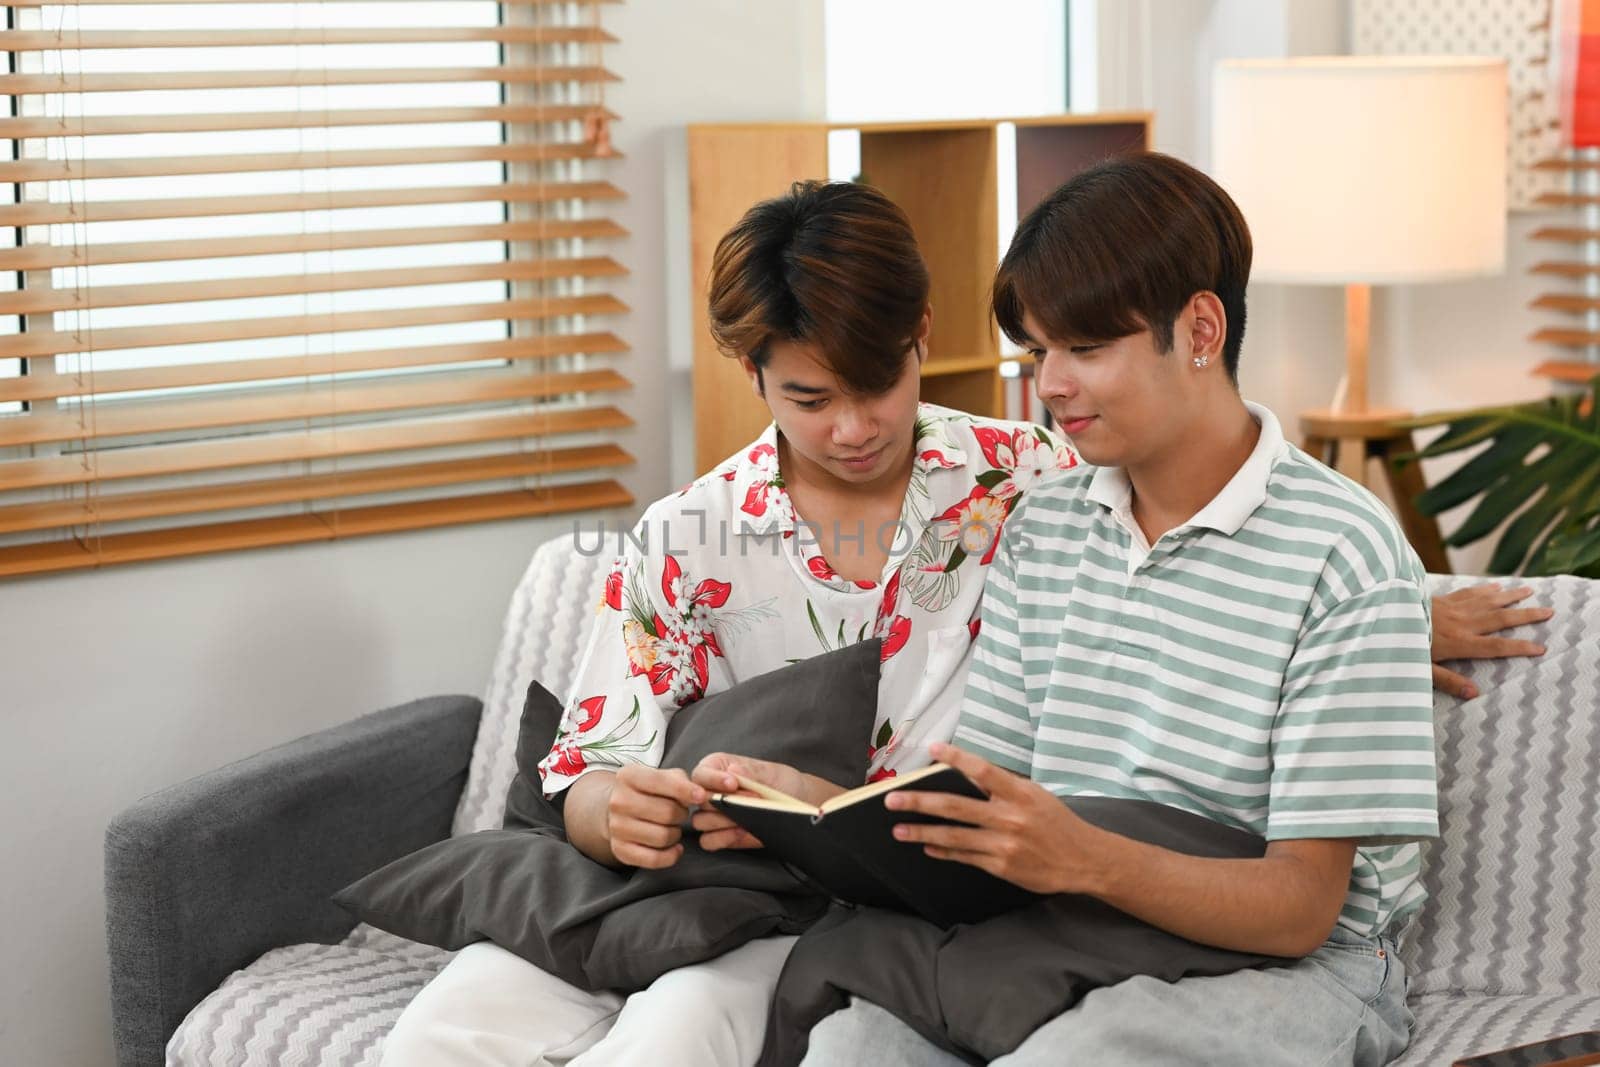 Relaxed young gay couple reading book on couch at home. LGBTQ, leisure and lifestyle concept.